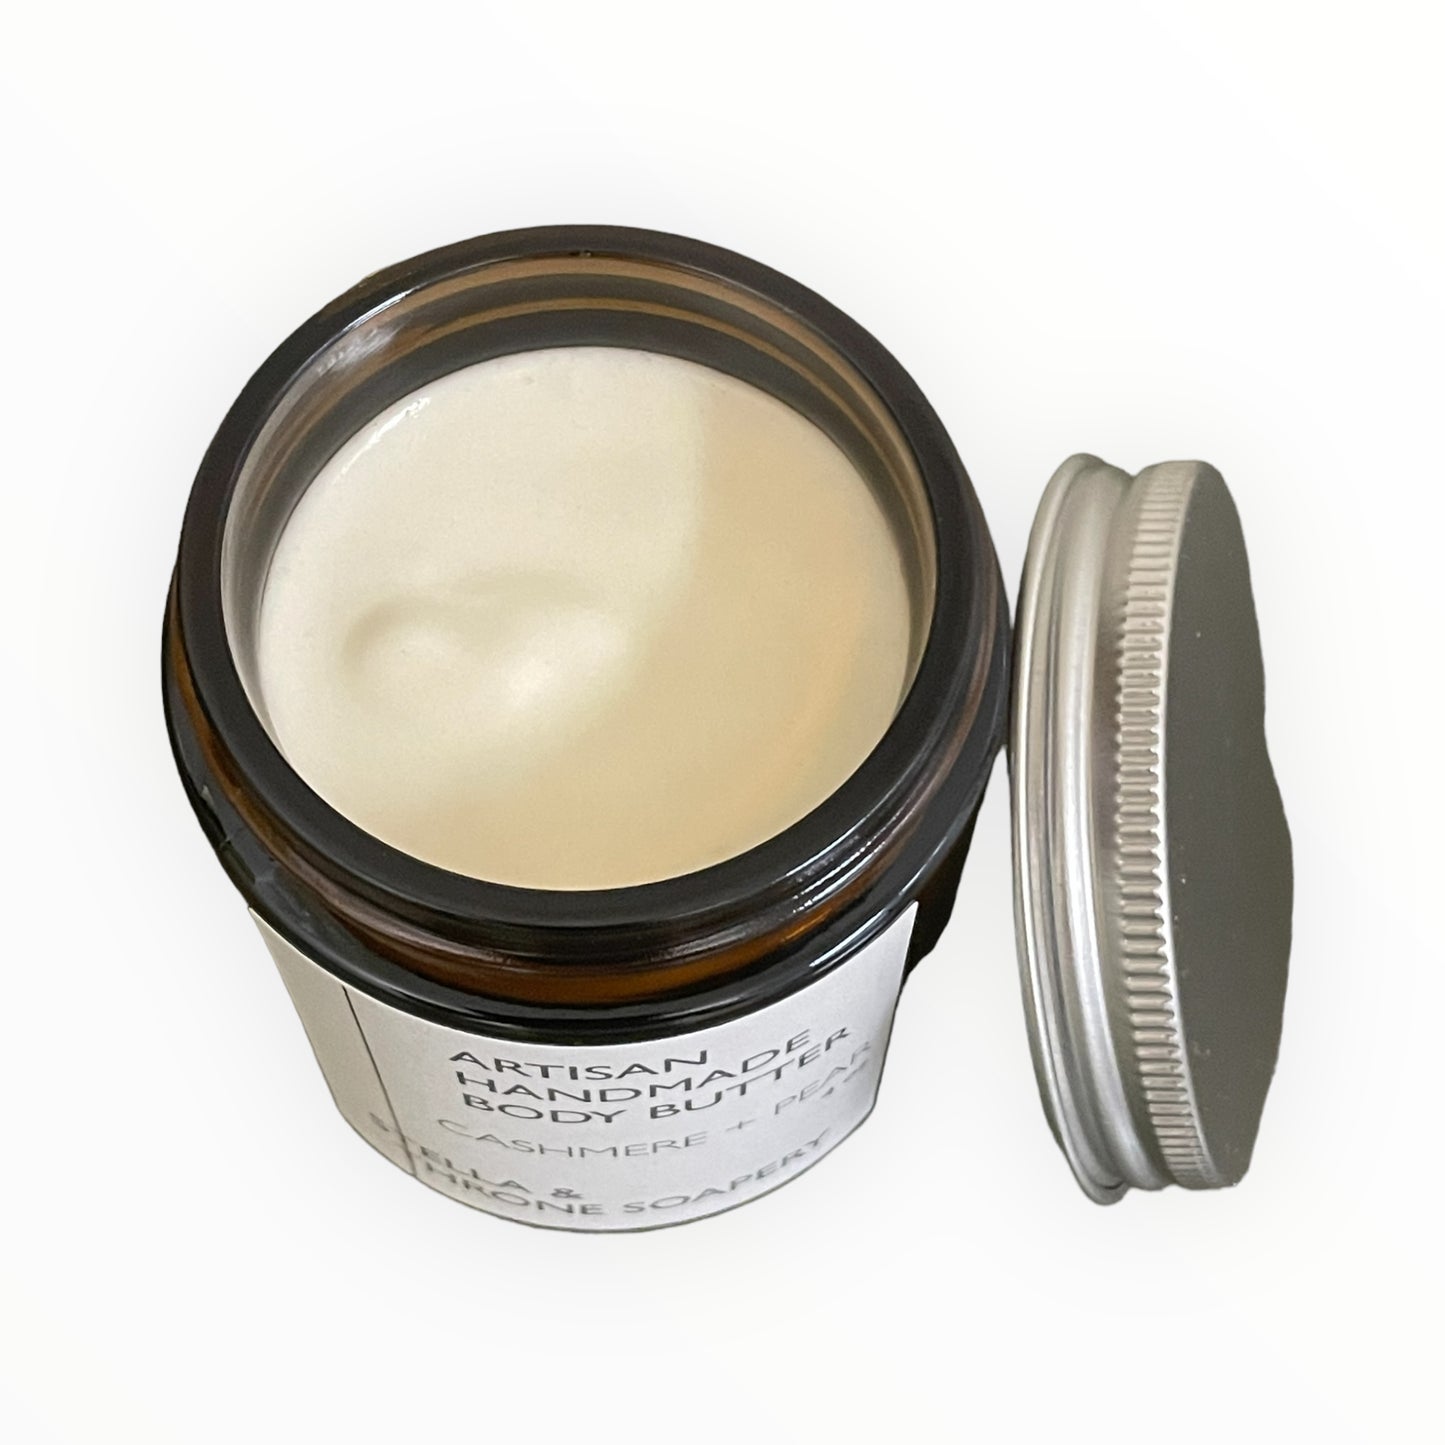 Body Butter: Cashmere and Pear